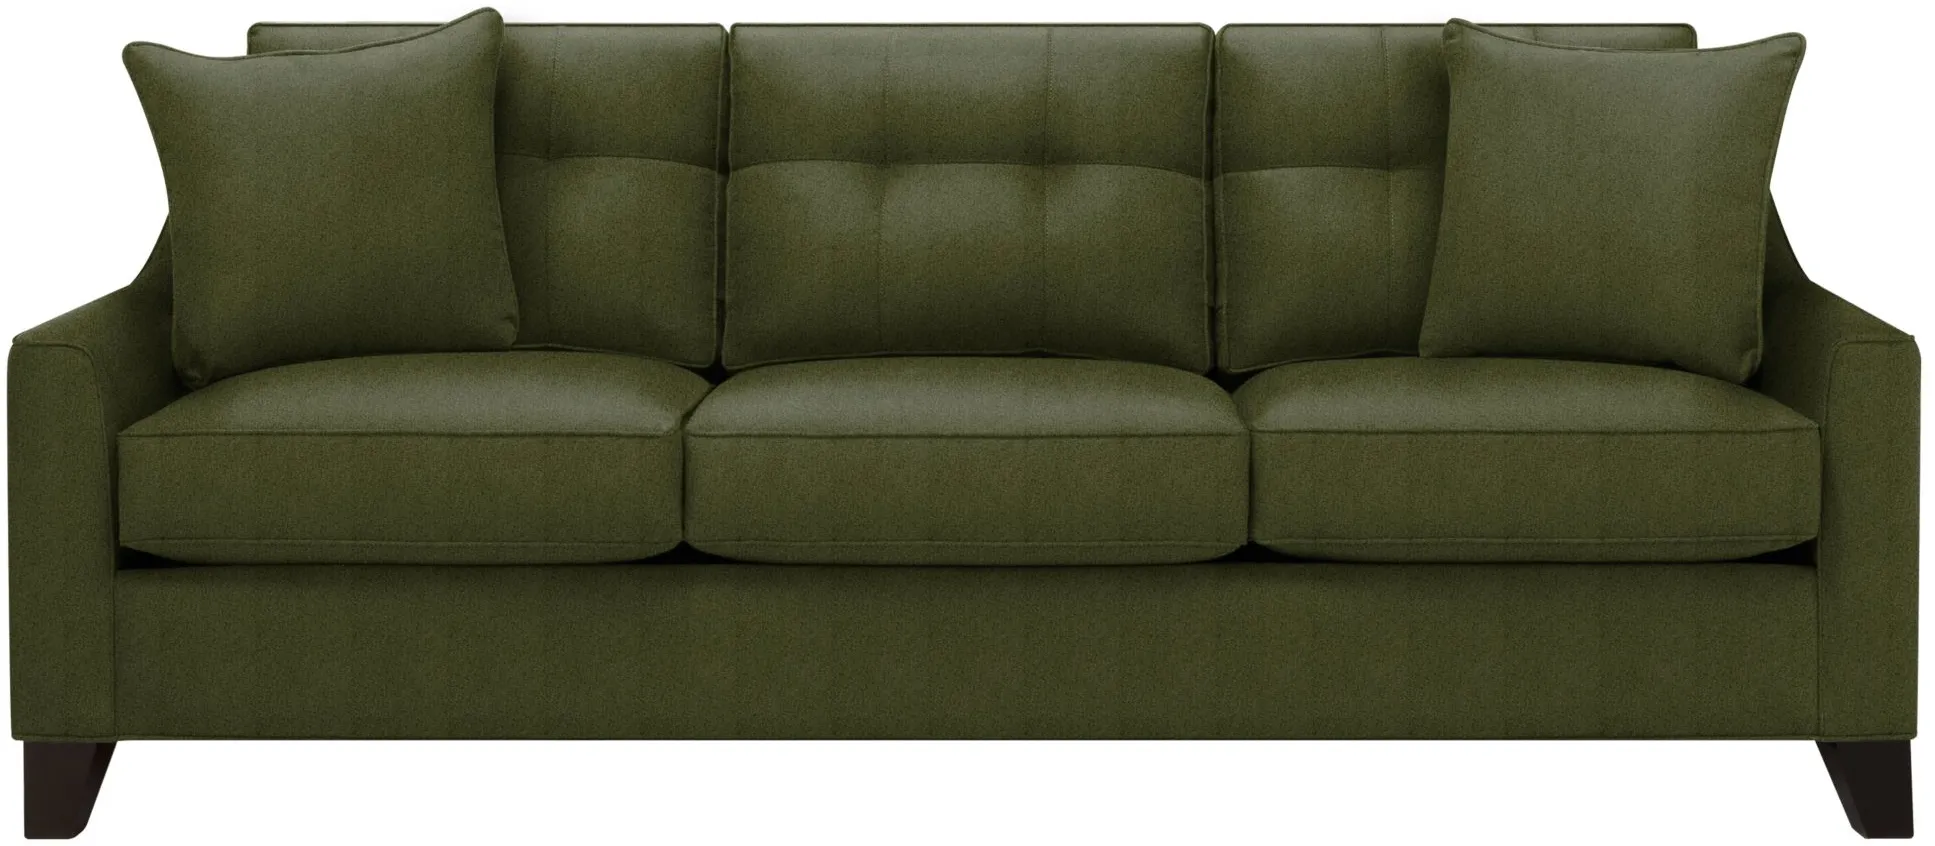 Carmine Queen Sleeper Sofa in Suede so Soft Pine by H.M. Richards